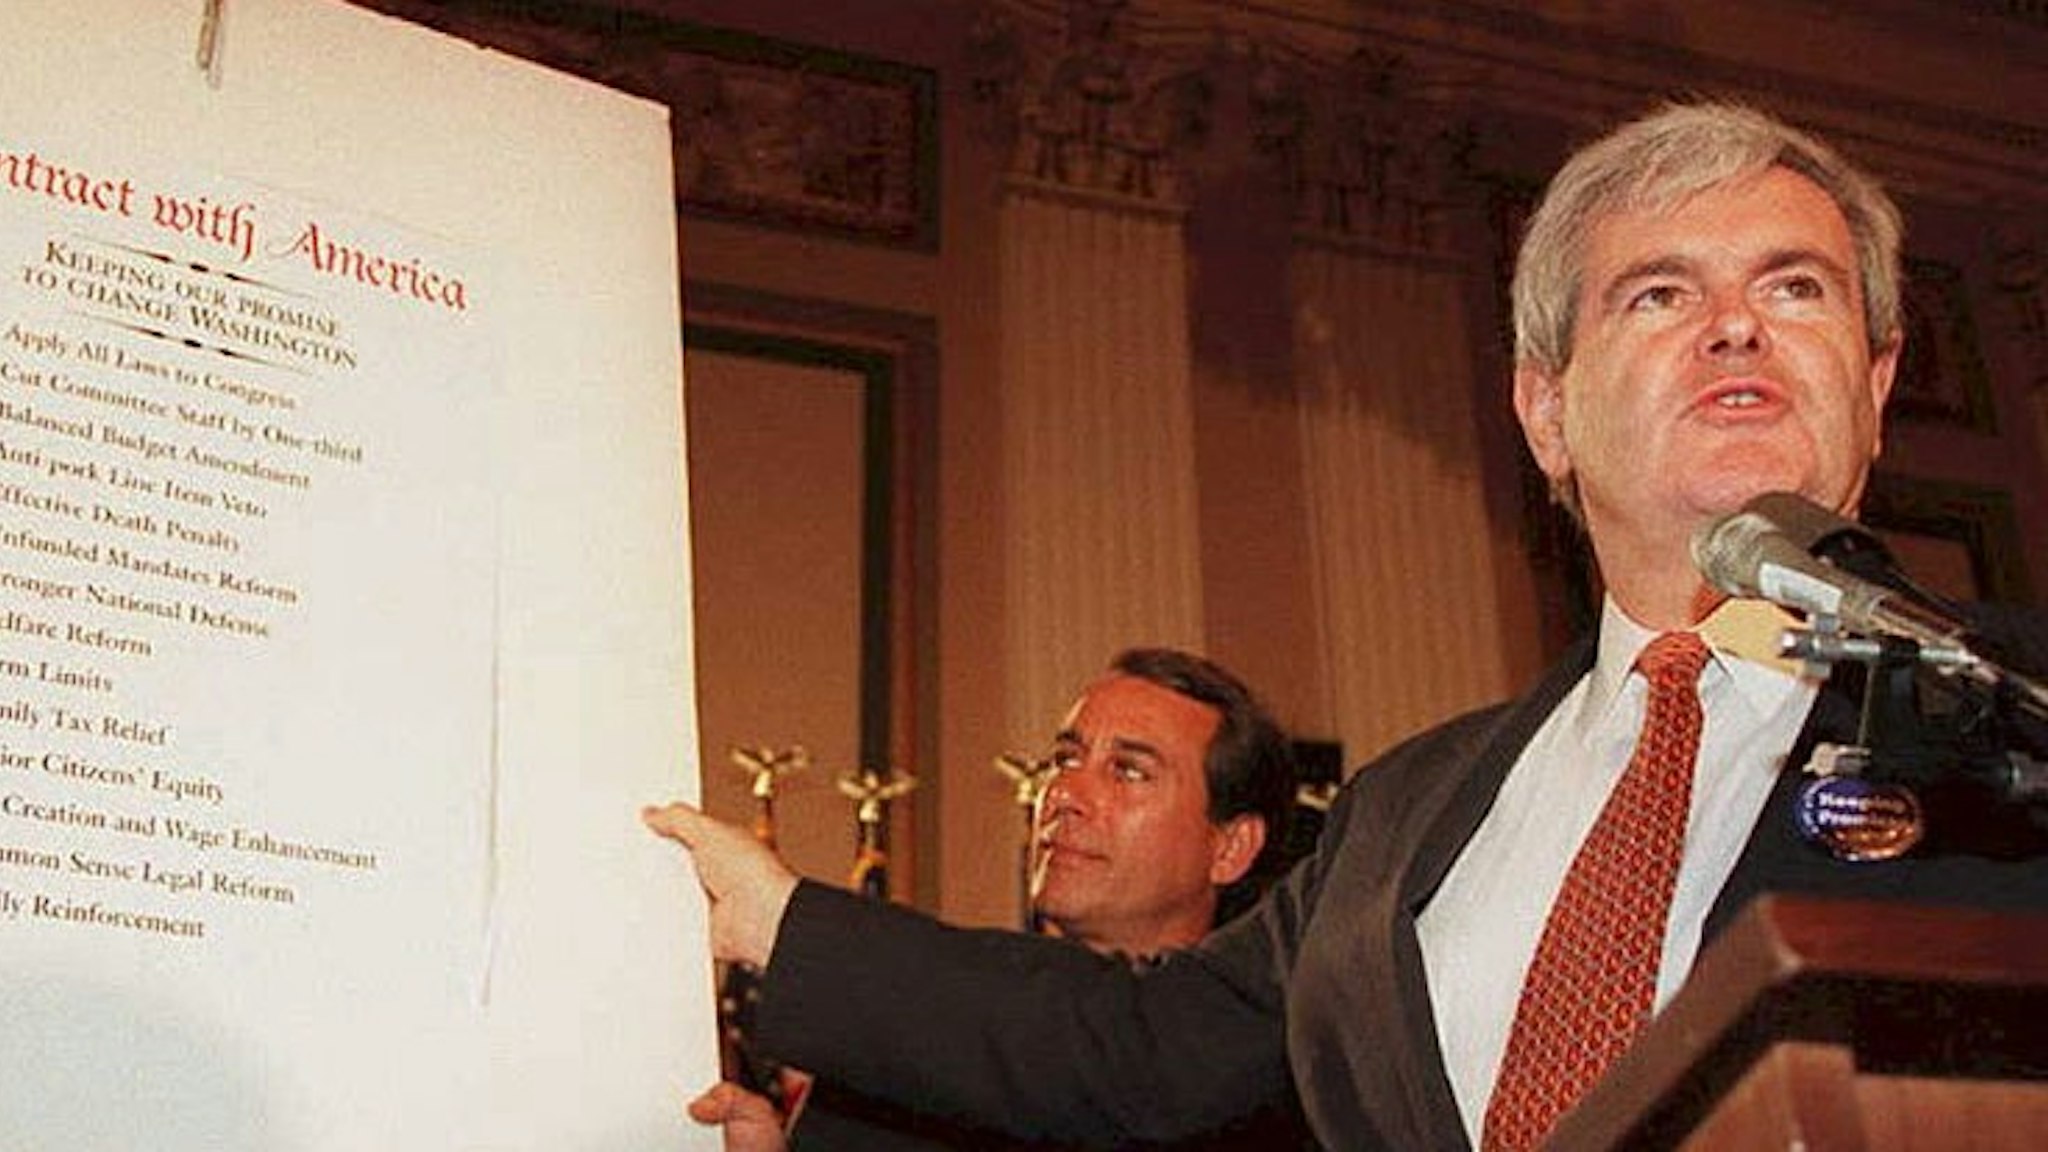 WASHINGTON, DC - FEBRUARY 22: Speaker of the US House of Representatives Newt Gingrich(R-GA), holds up a copy of the Republican party's "Contract With America" during a rally to celebrate the first 50 days of the Republican majority in Congress 22 February. Gigngrich is also preparing a plan to outline the House agenda for the rest of the year, which will attempt to put substance behind the Republican call for a balanced budget.